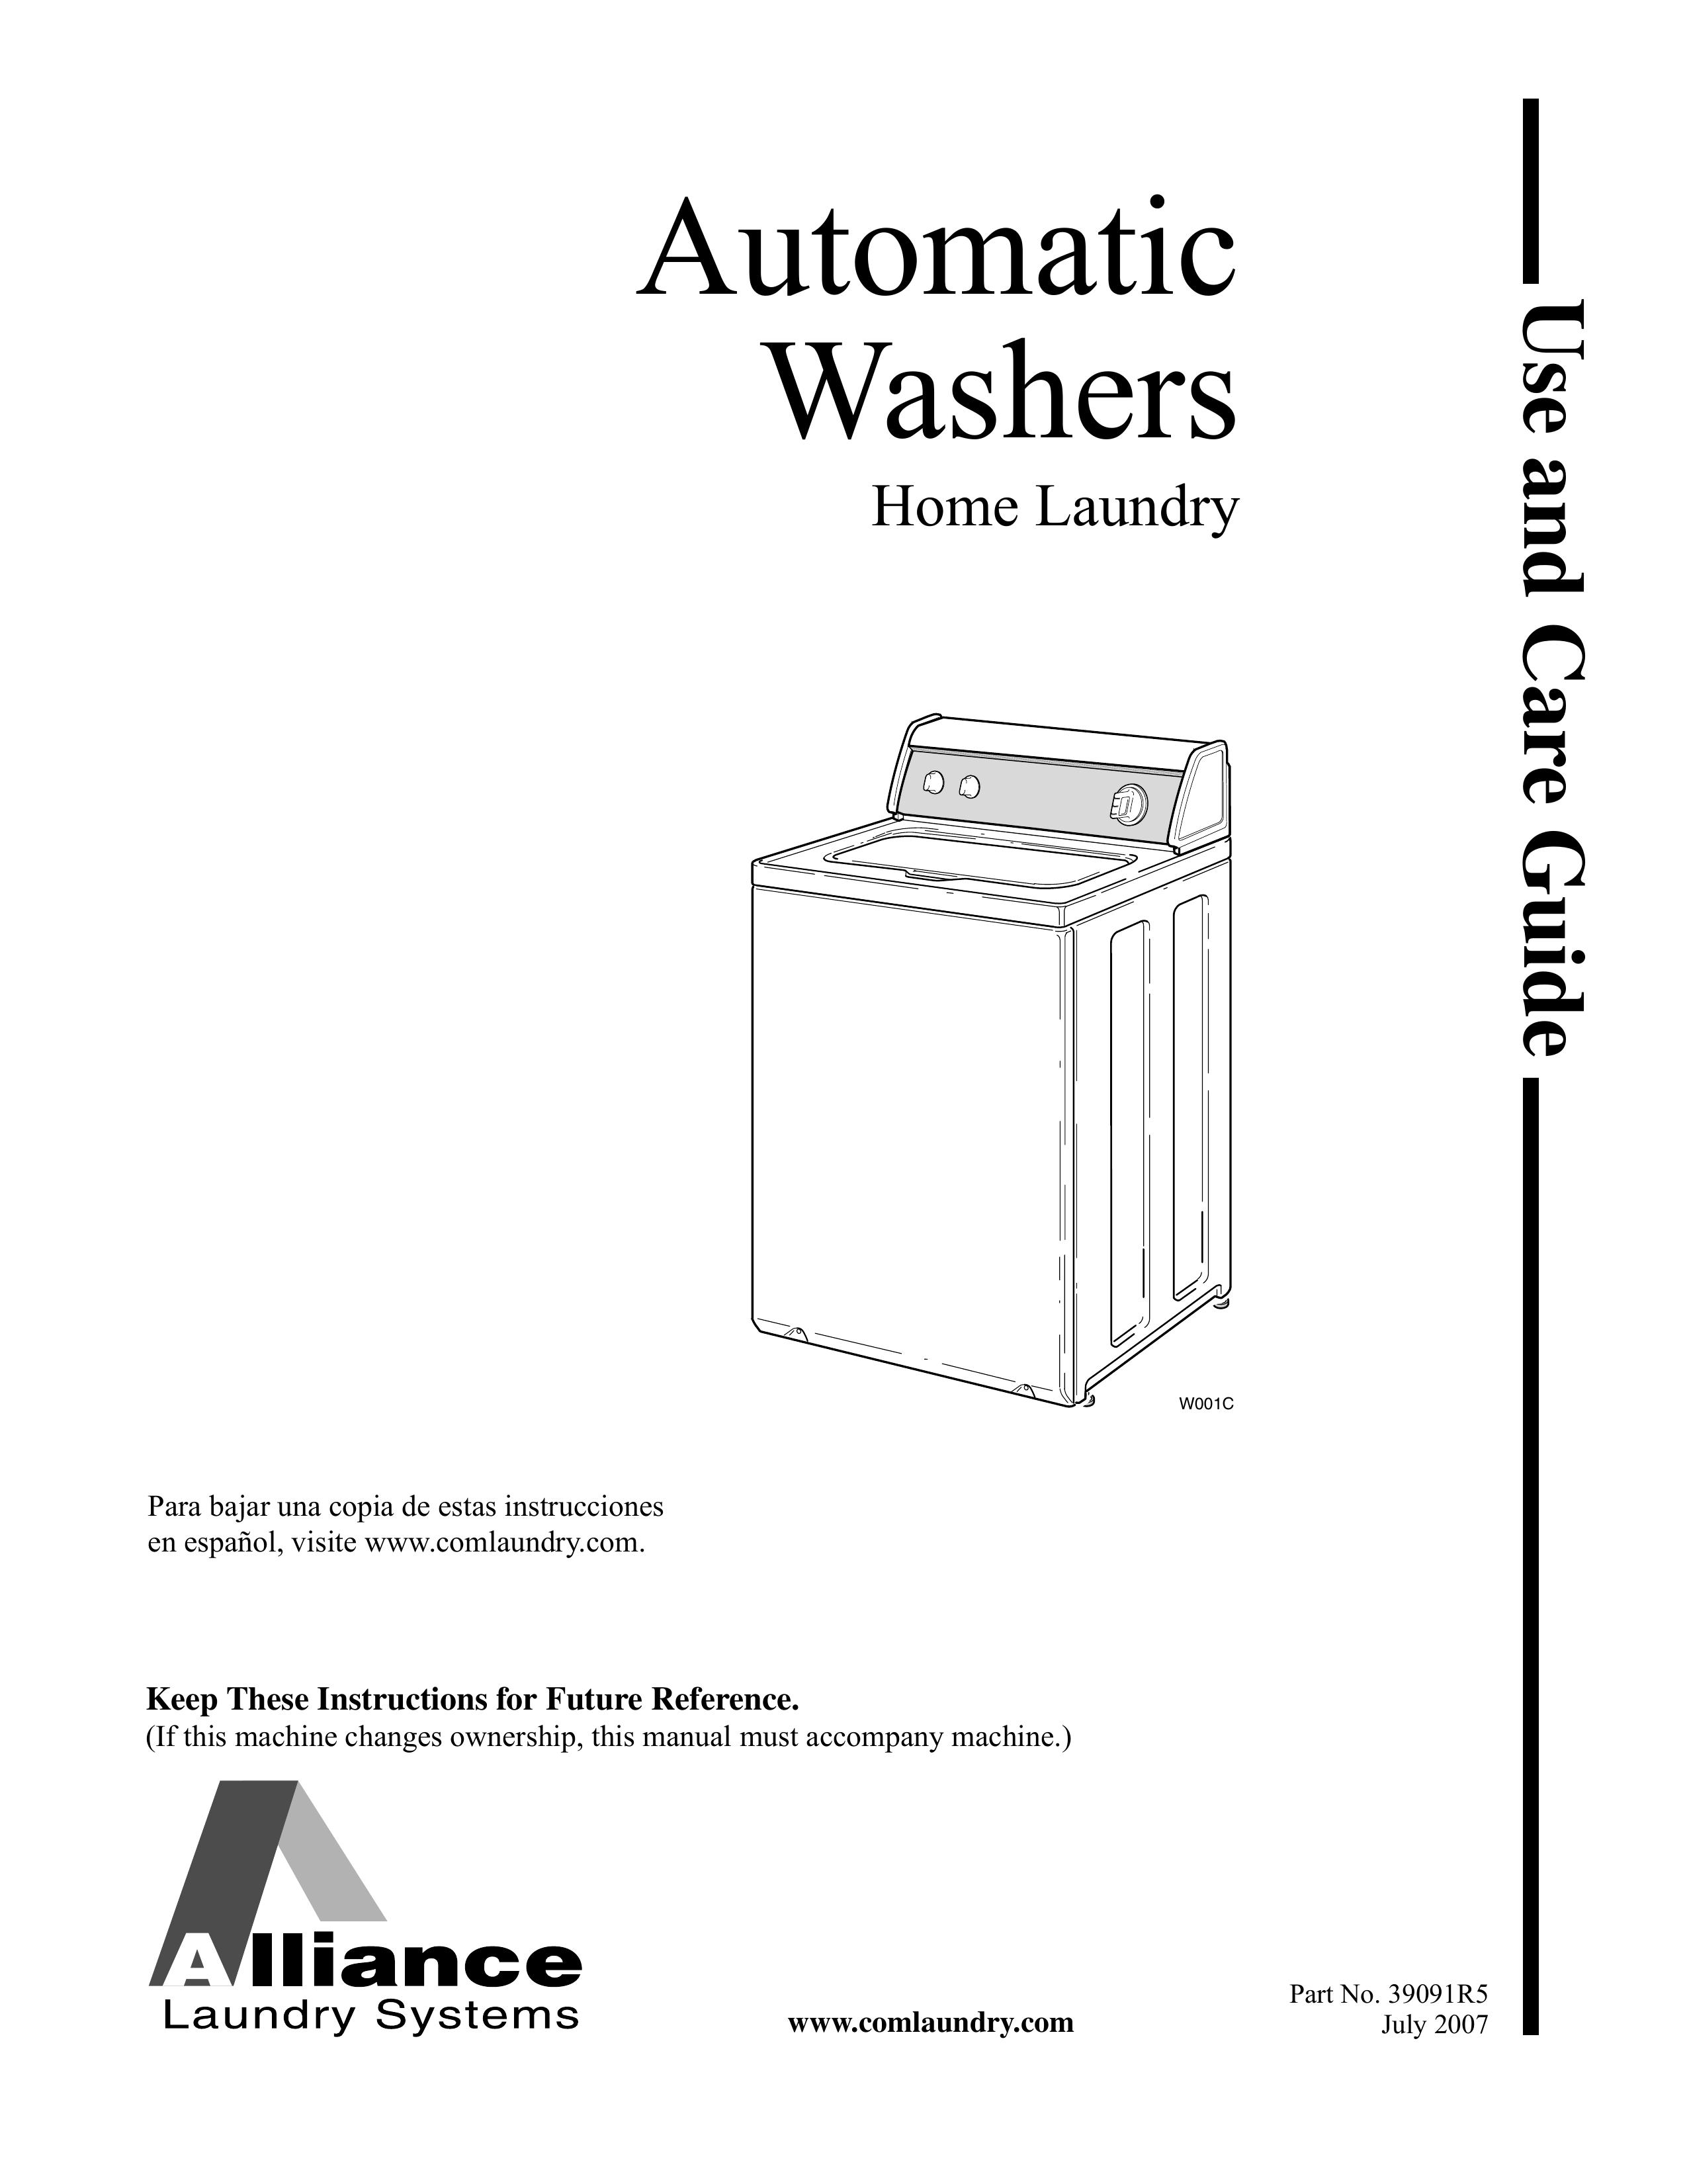 Alliance Laundry Systems LWS45M Washer/Dryer User Manual